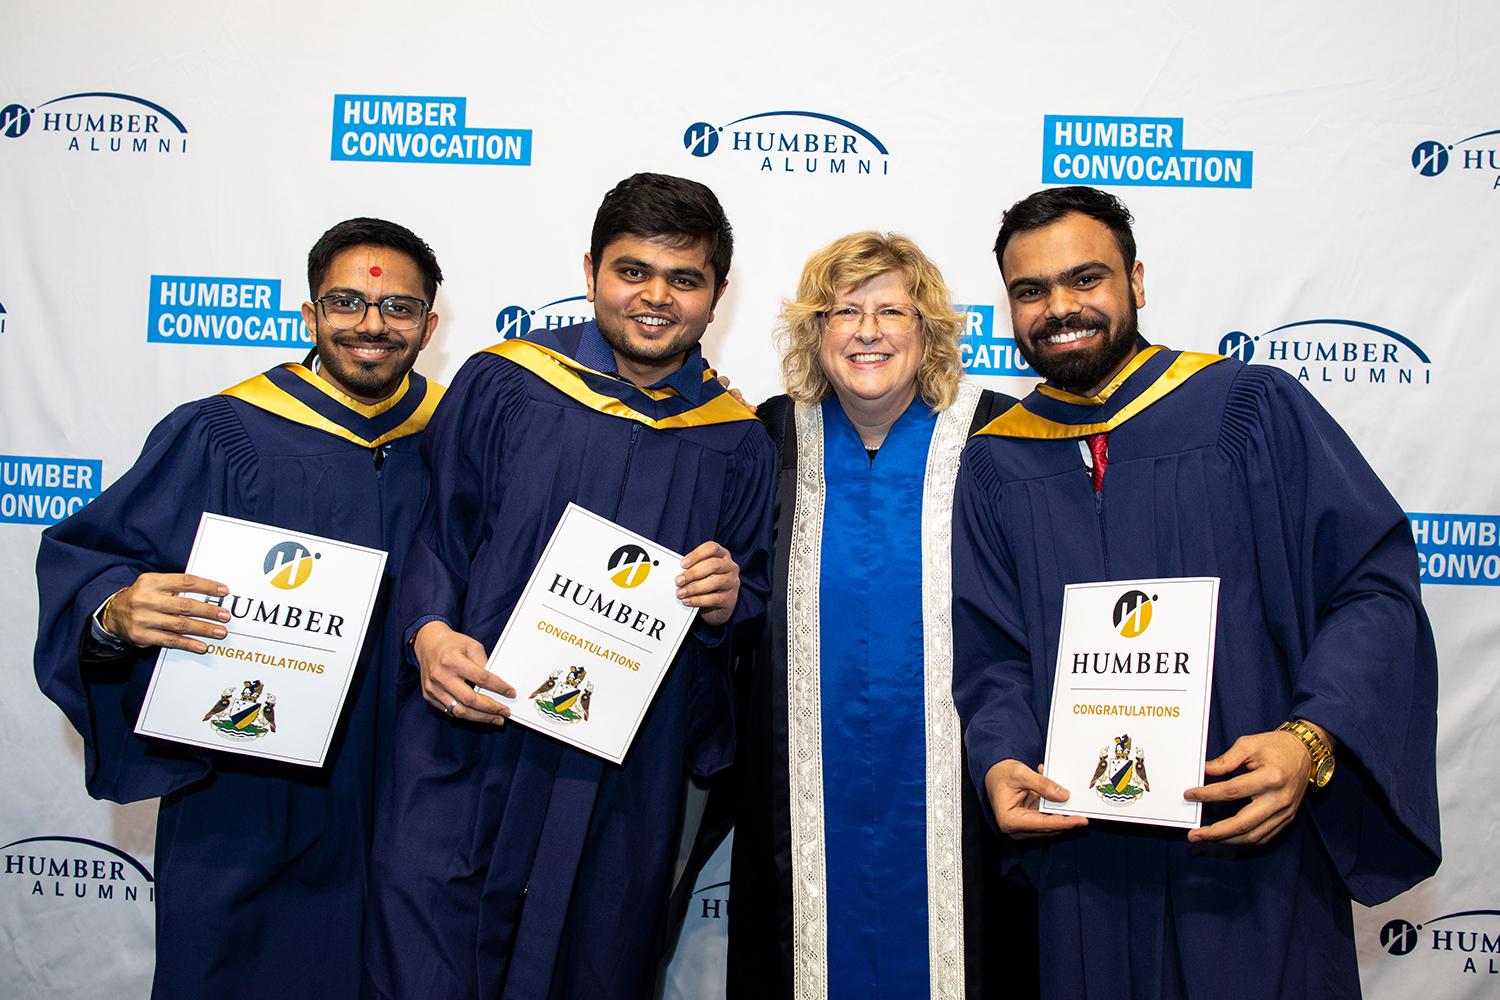 Three people wearing graduation gowns and holding pieces of paper pose for a photo with Humber College’s president and CEO.